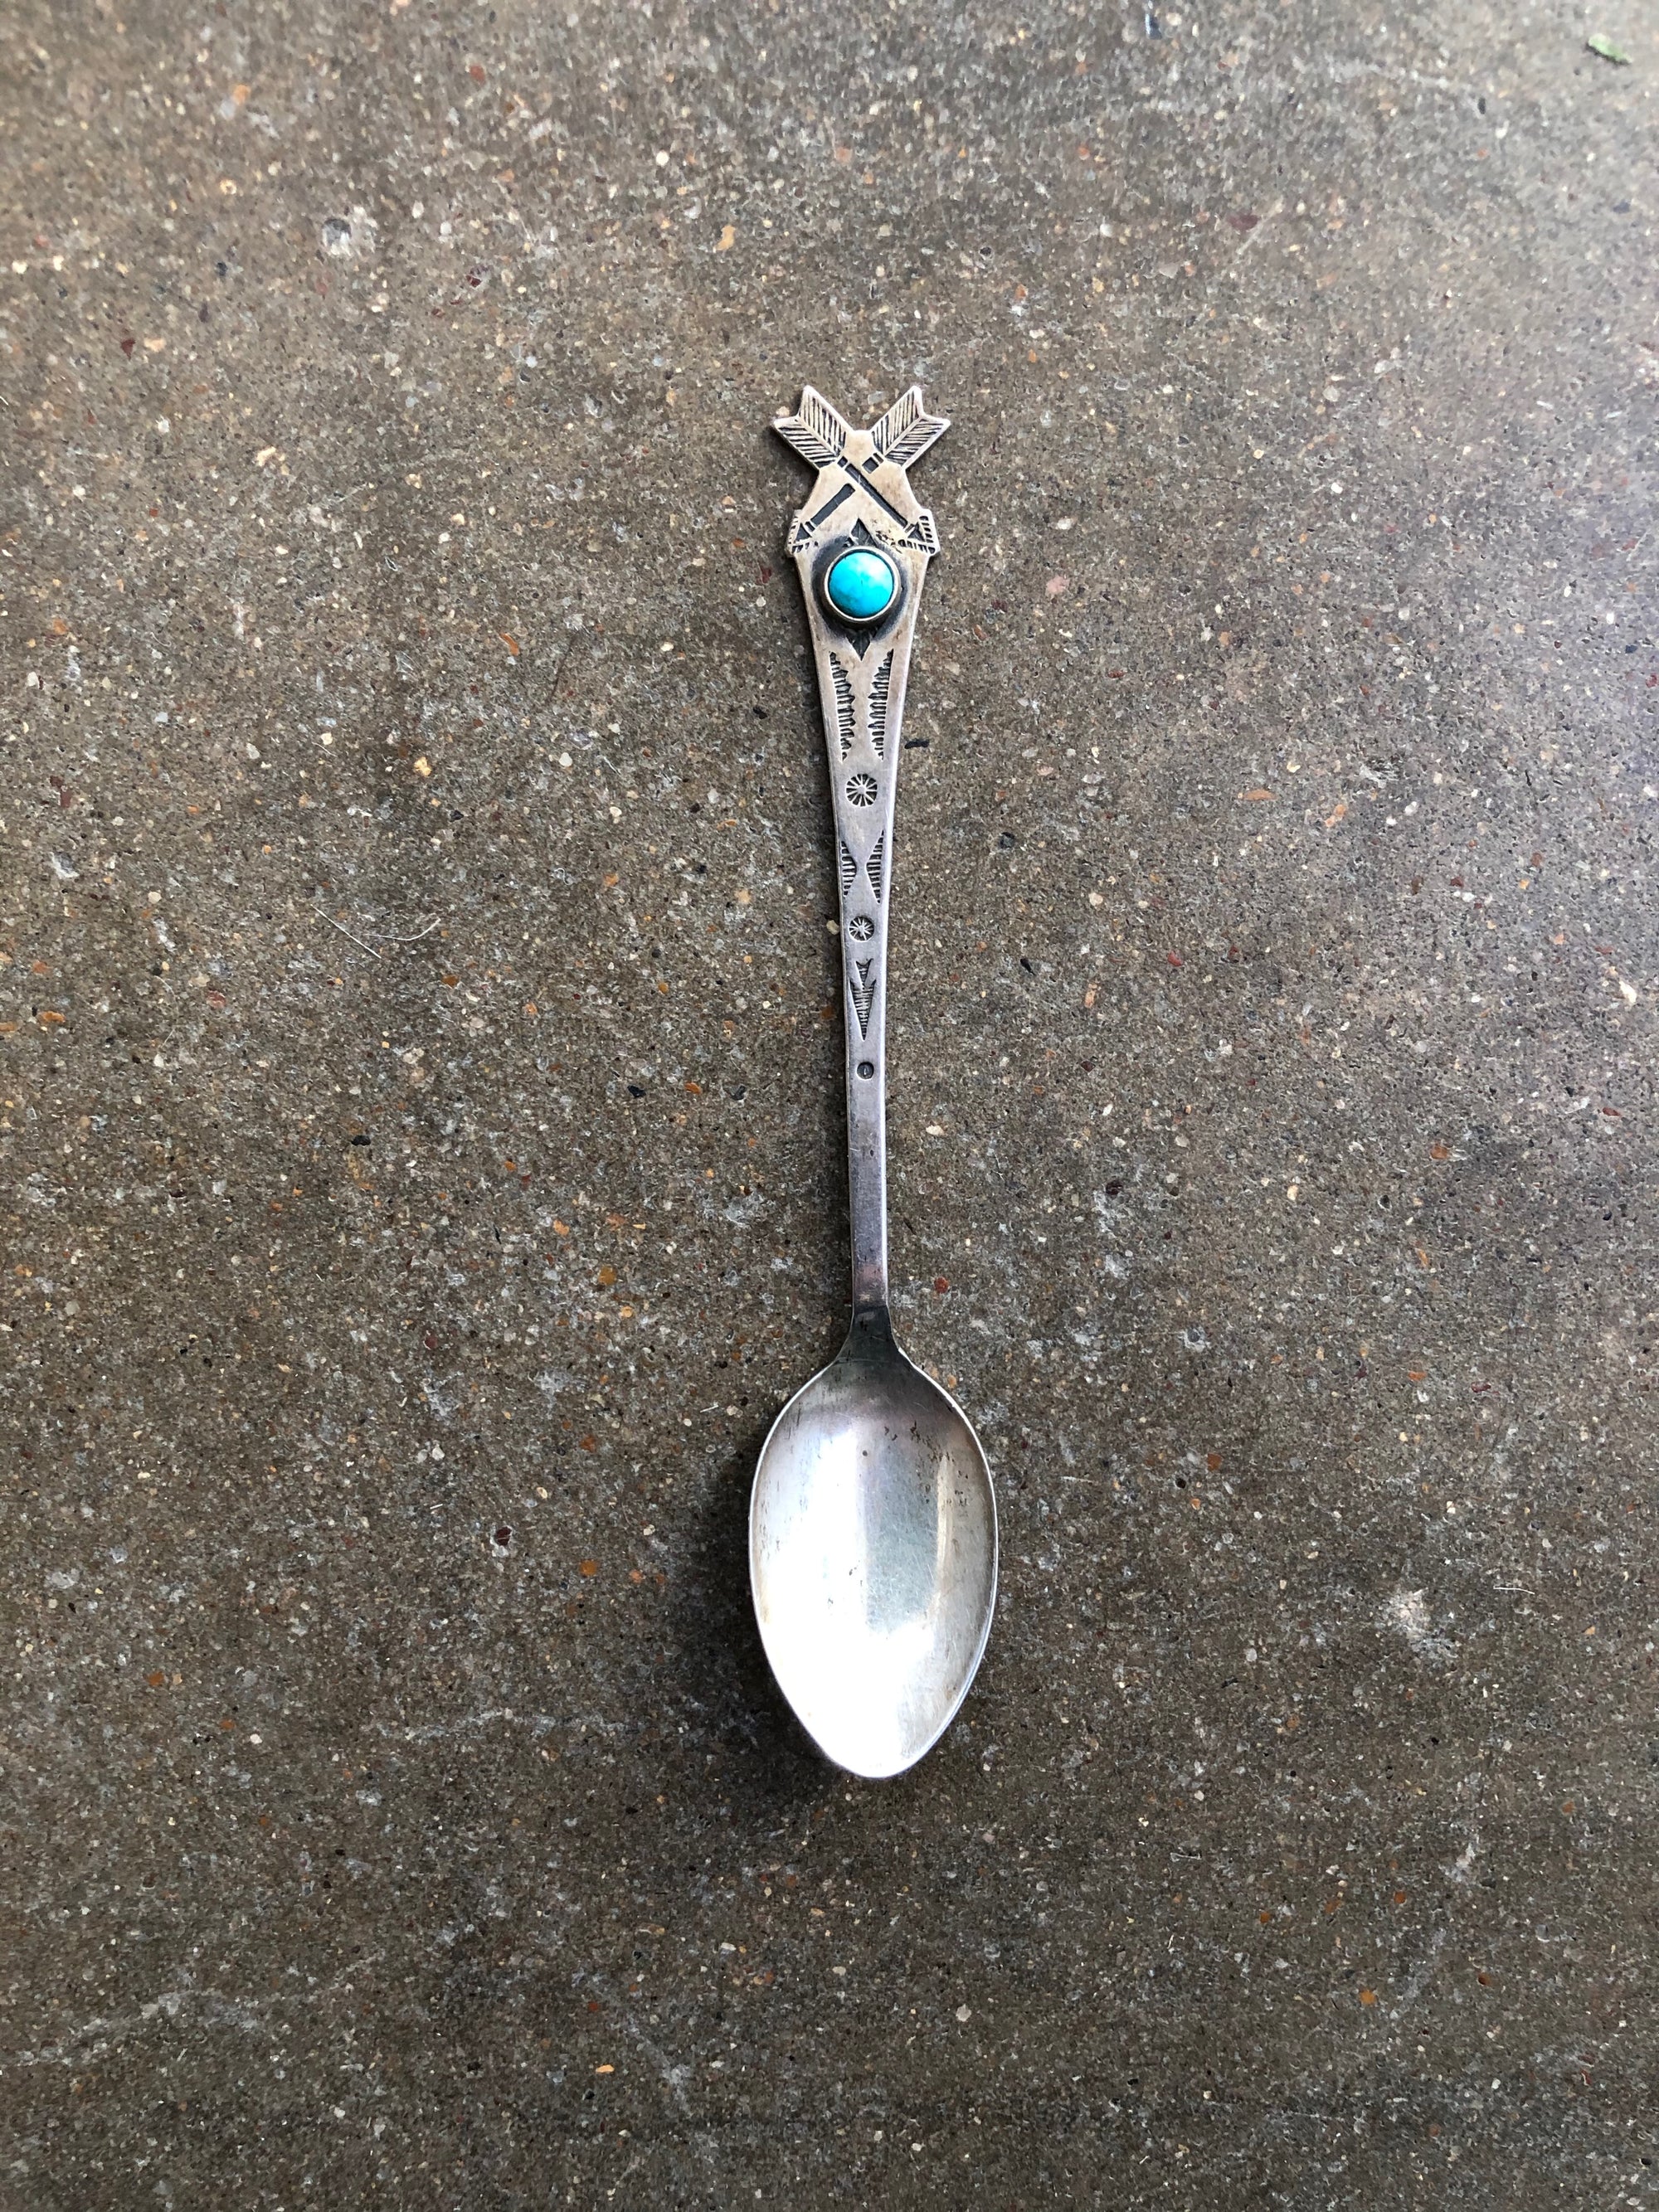 Vintage Turquoise Spoon With Arrows